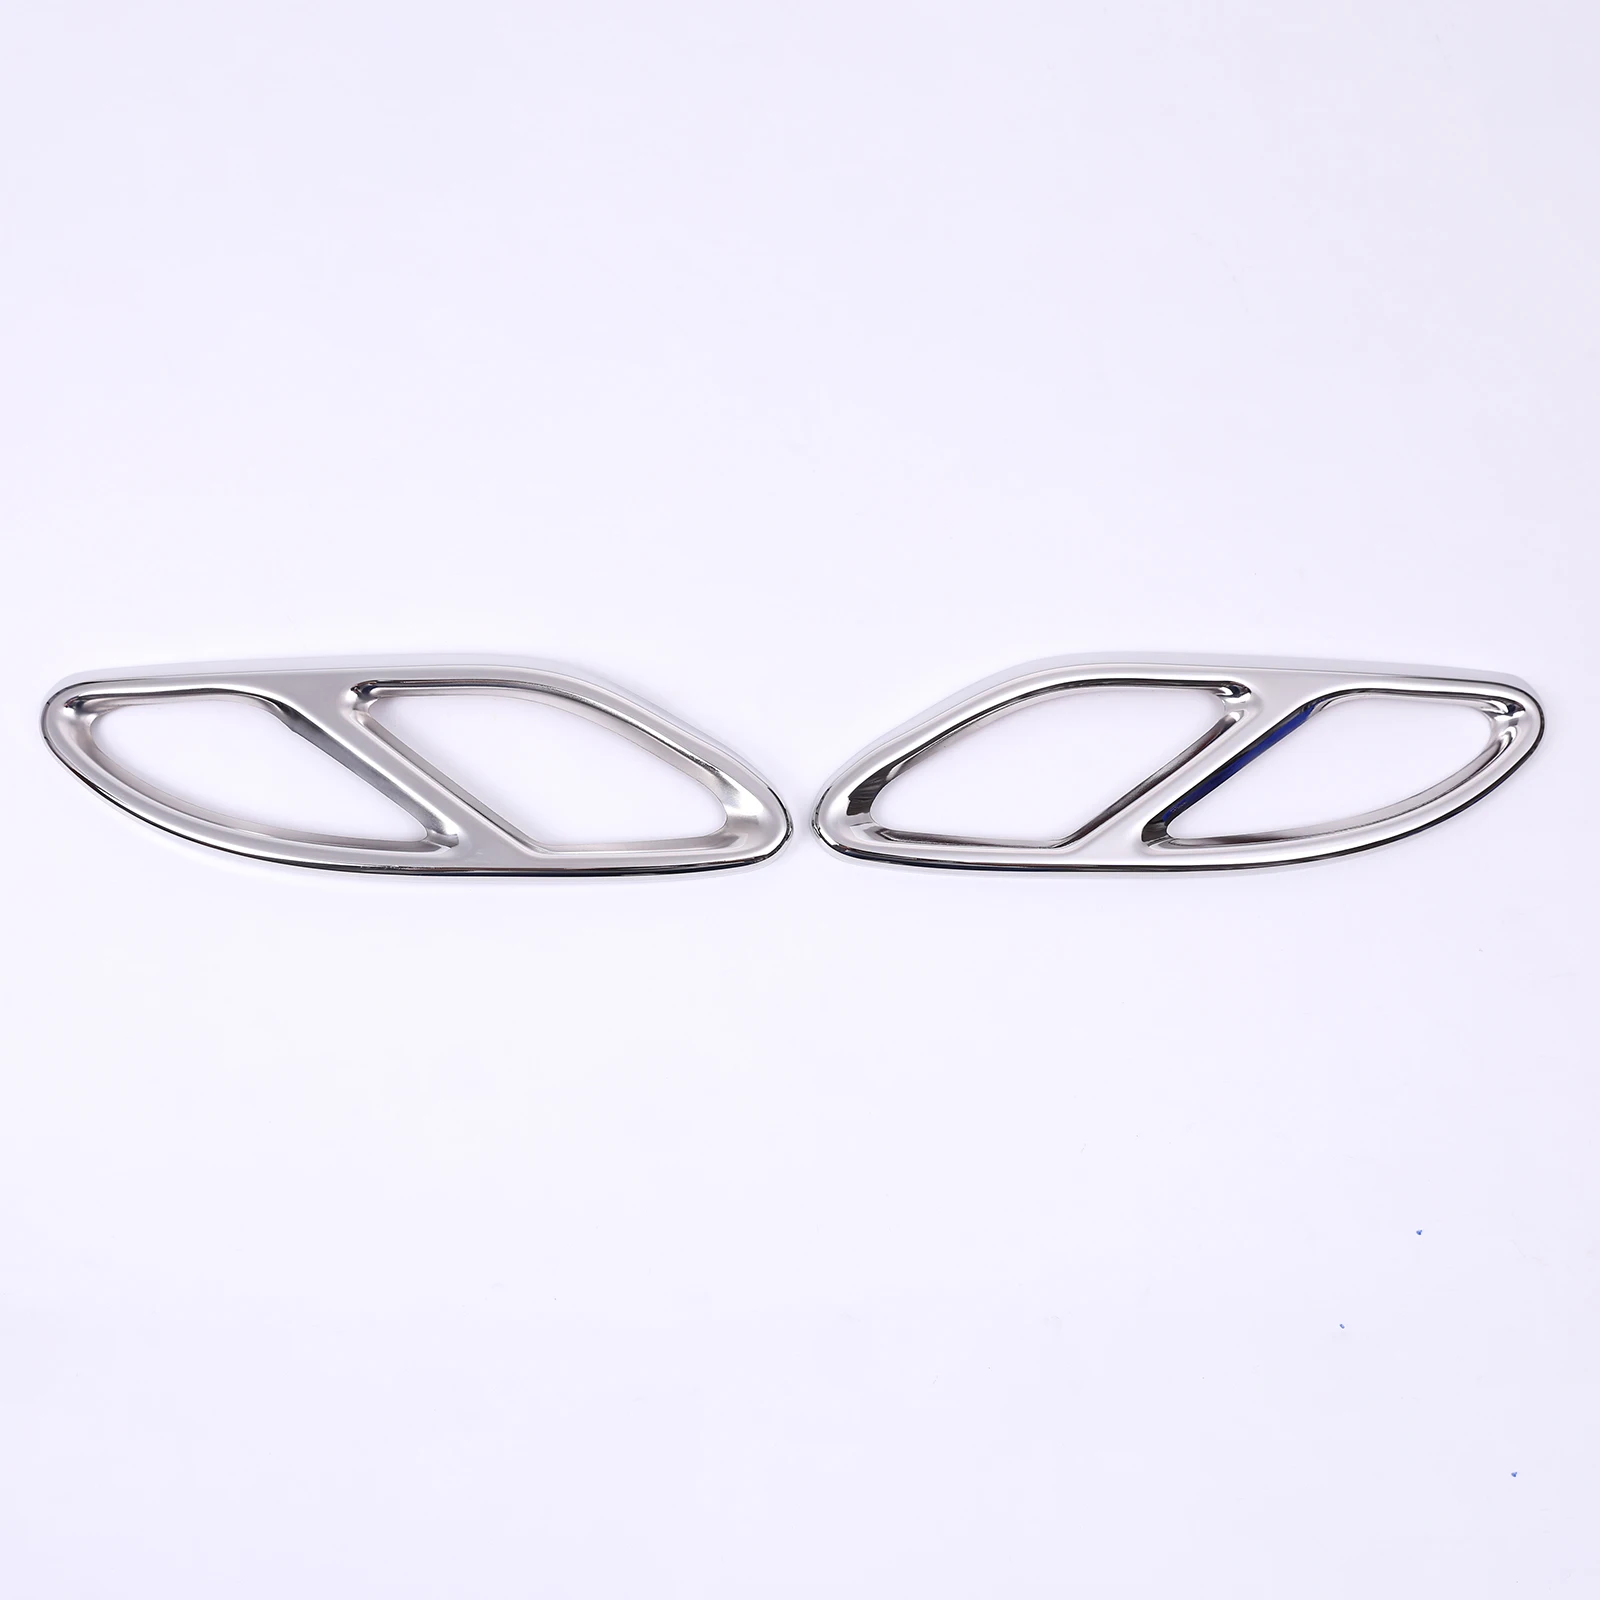 2Pcs Exhaust Pipe Cover Stainless Steel Muffler Fit for W205 Coupe 2015-2019